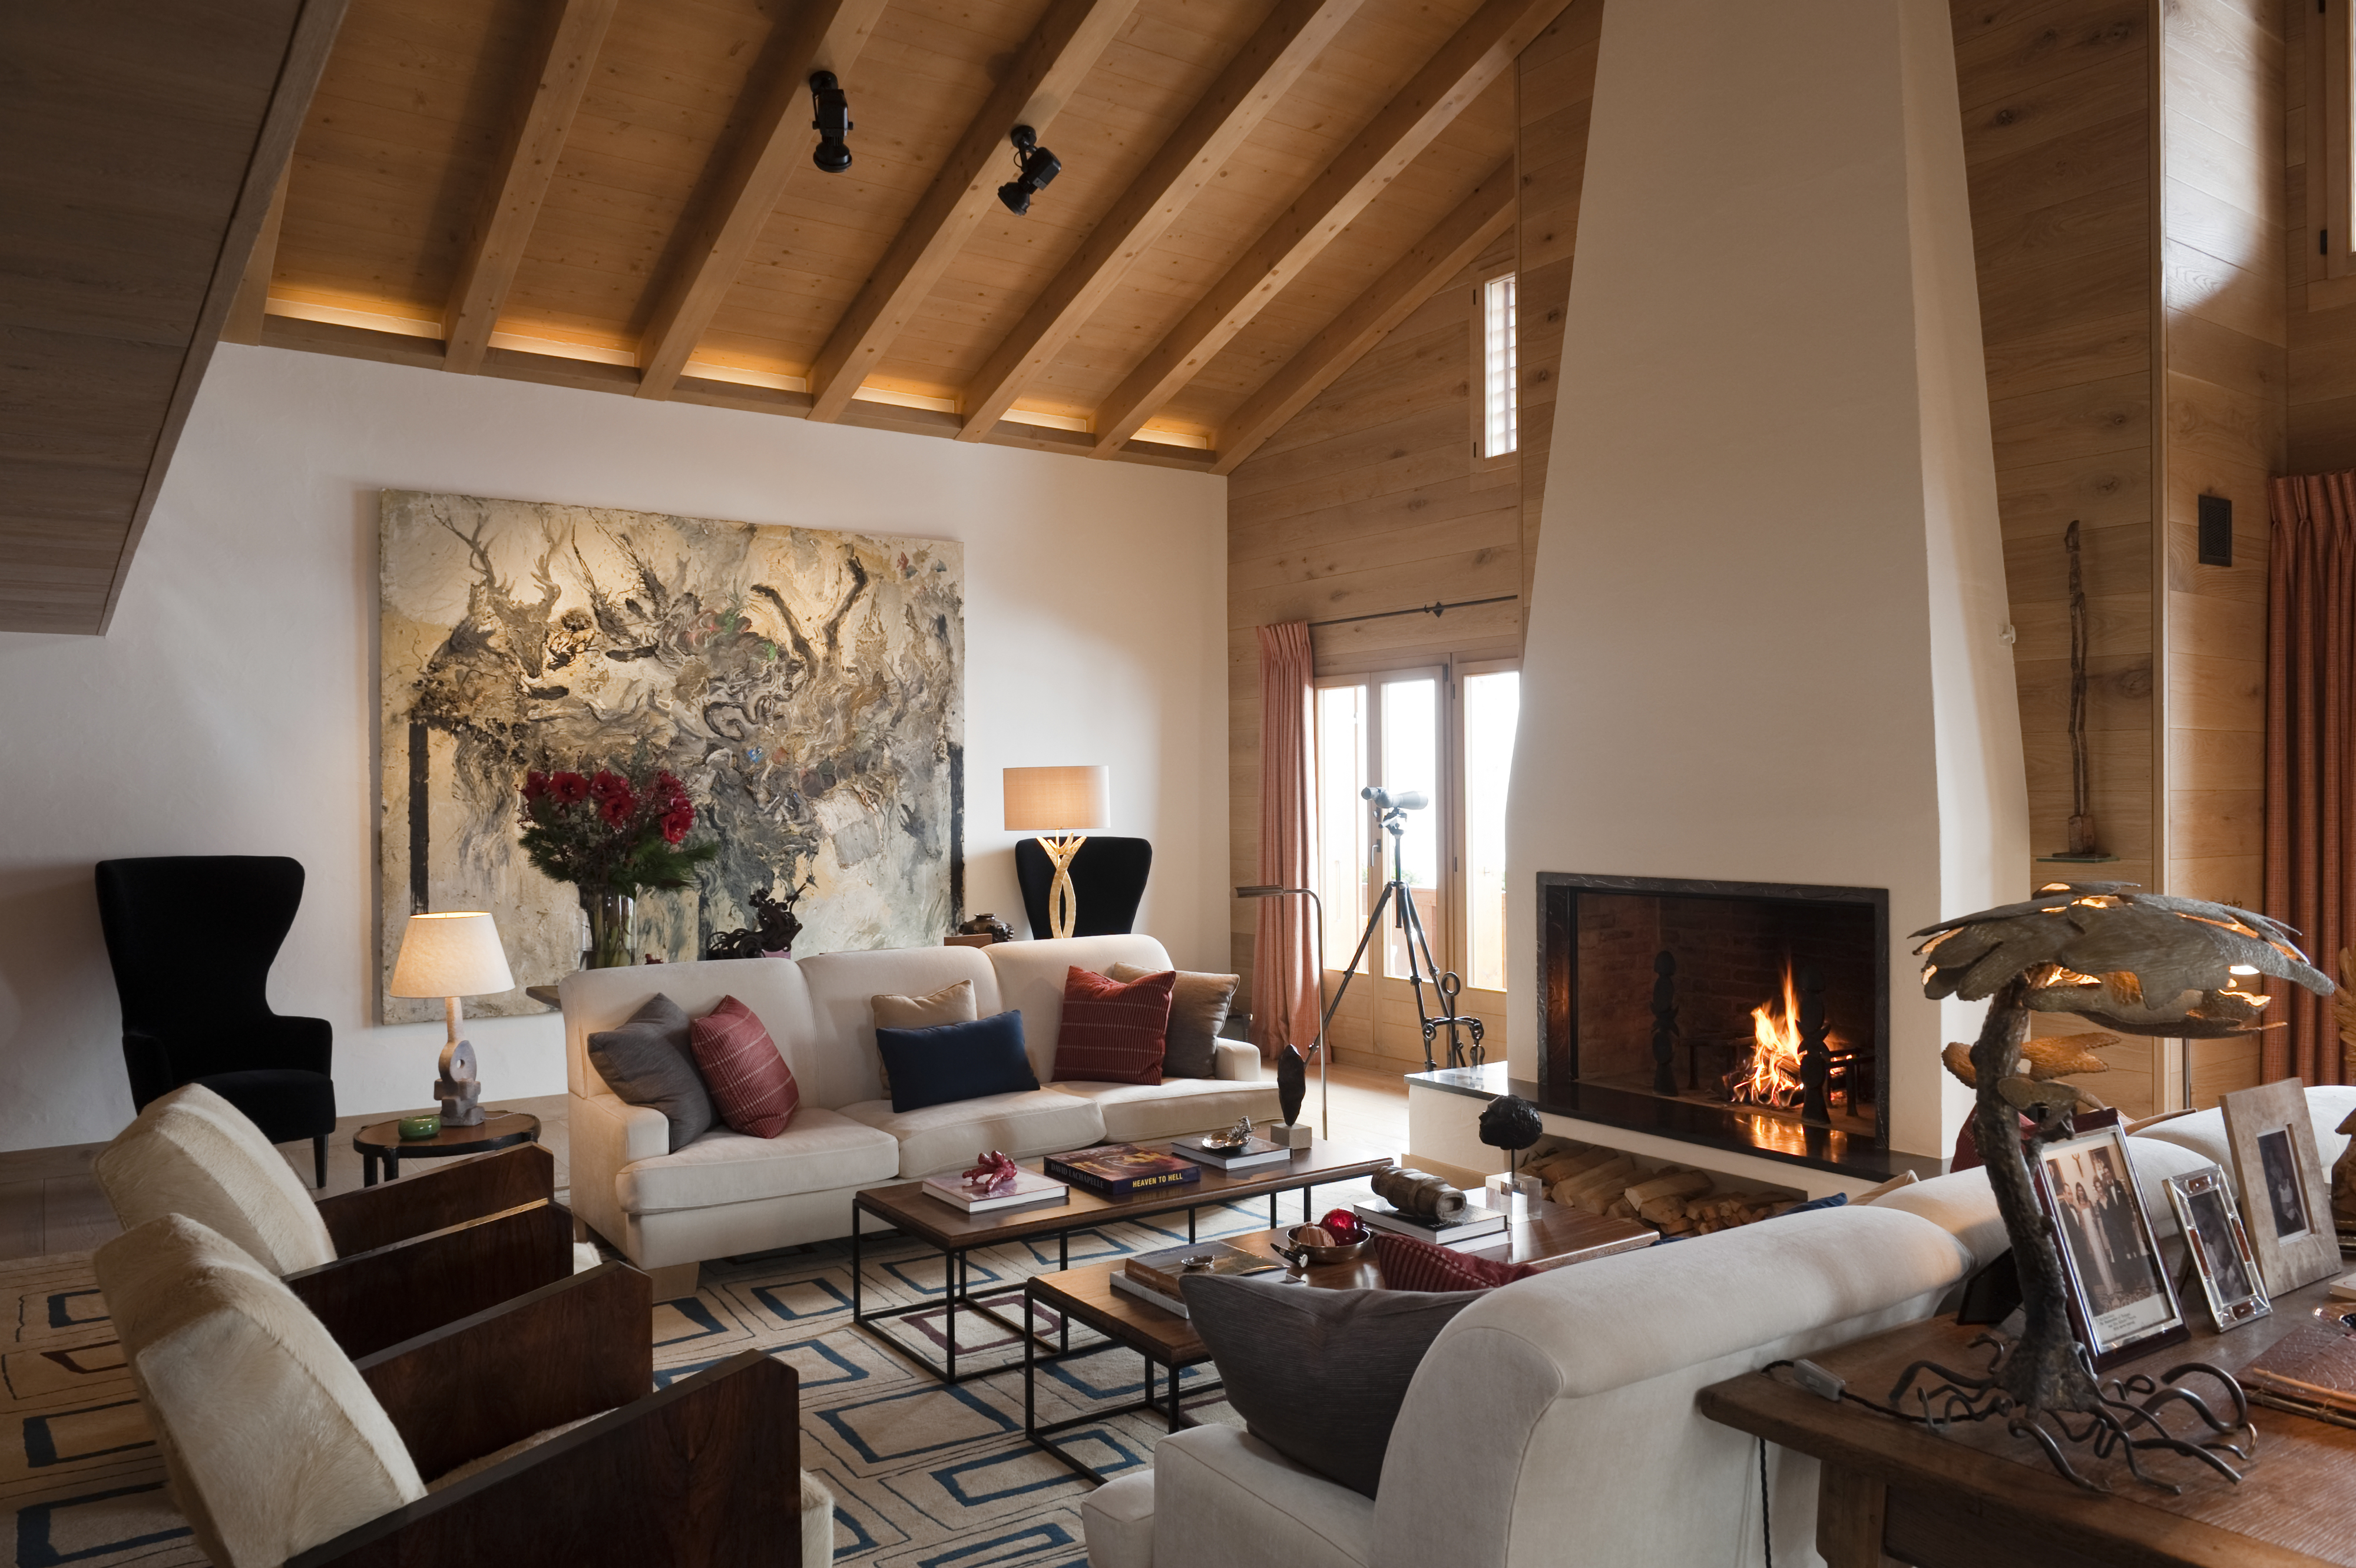 Cozy living room with a lit fireplace, sofas, and wooden beams on the ceiling